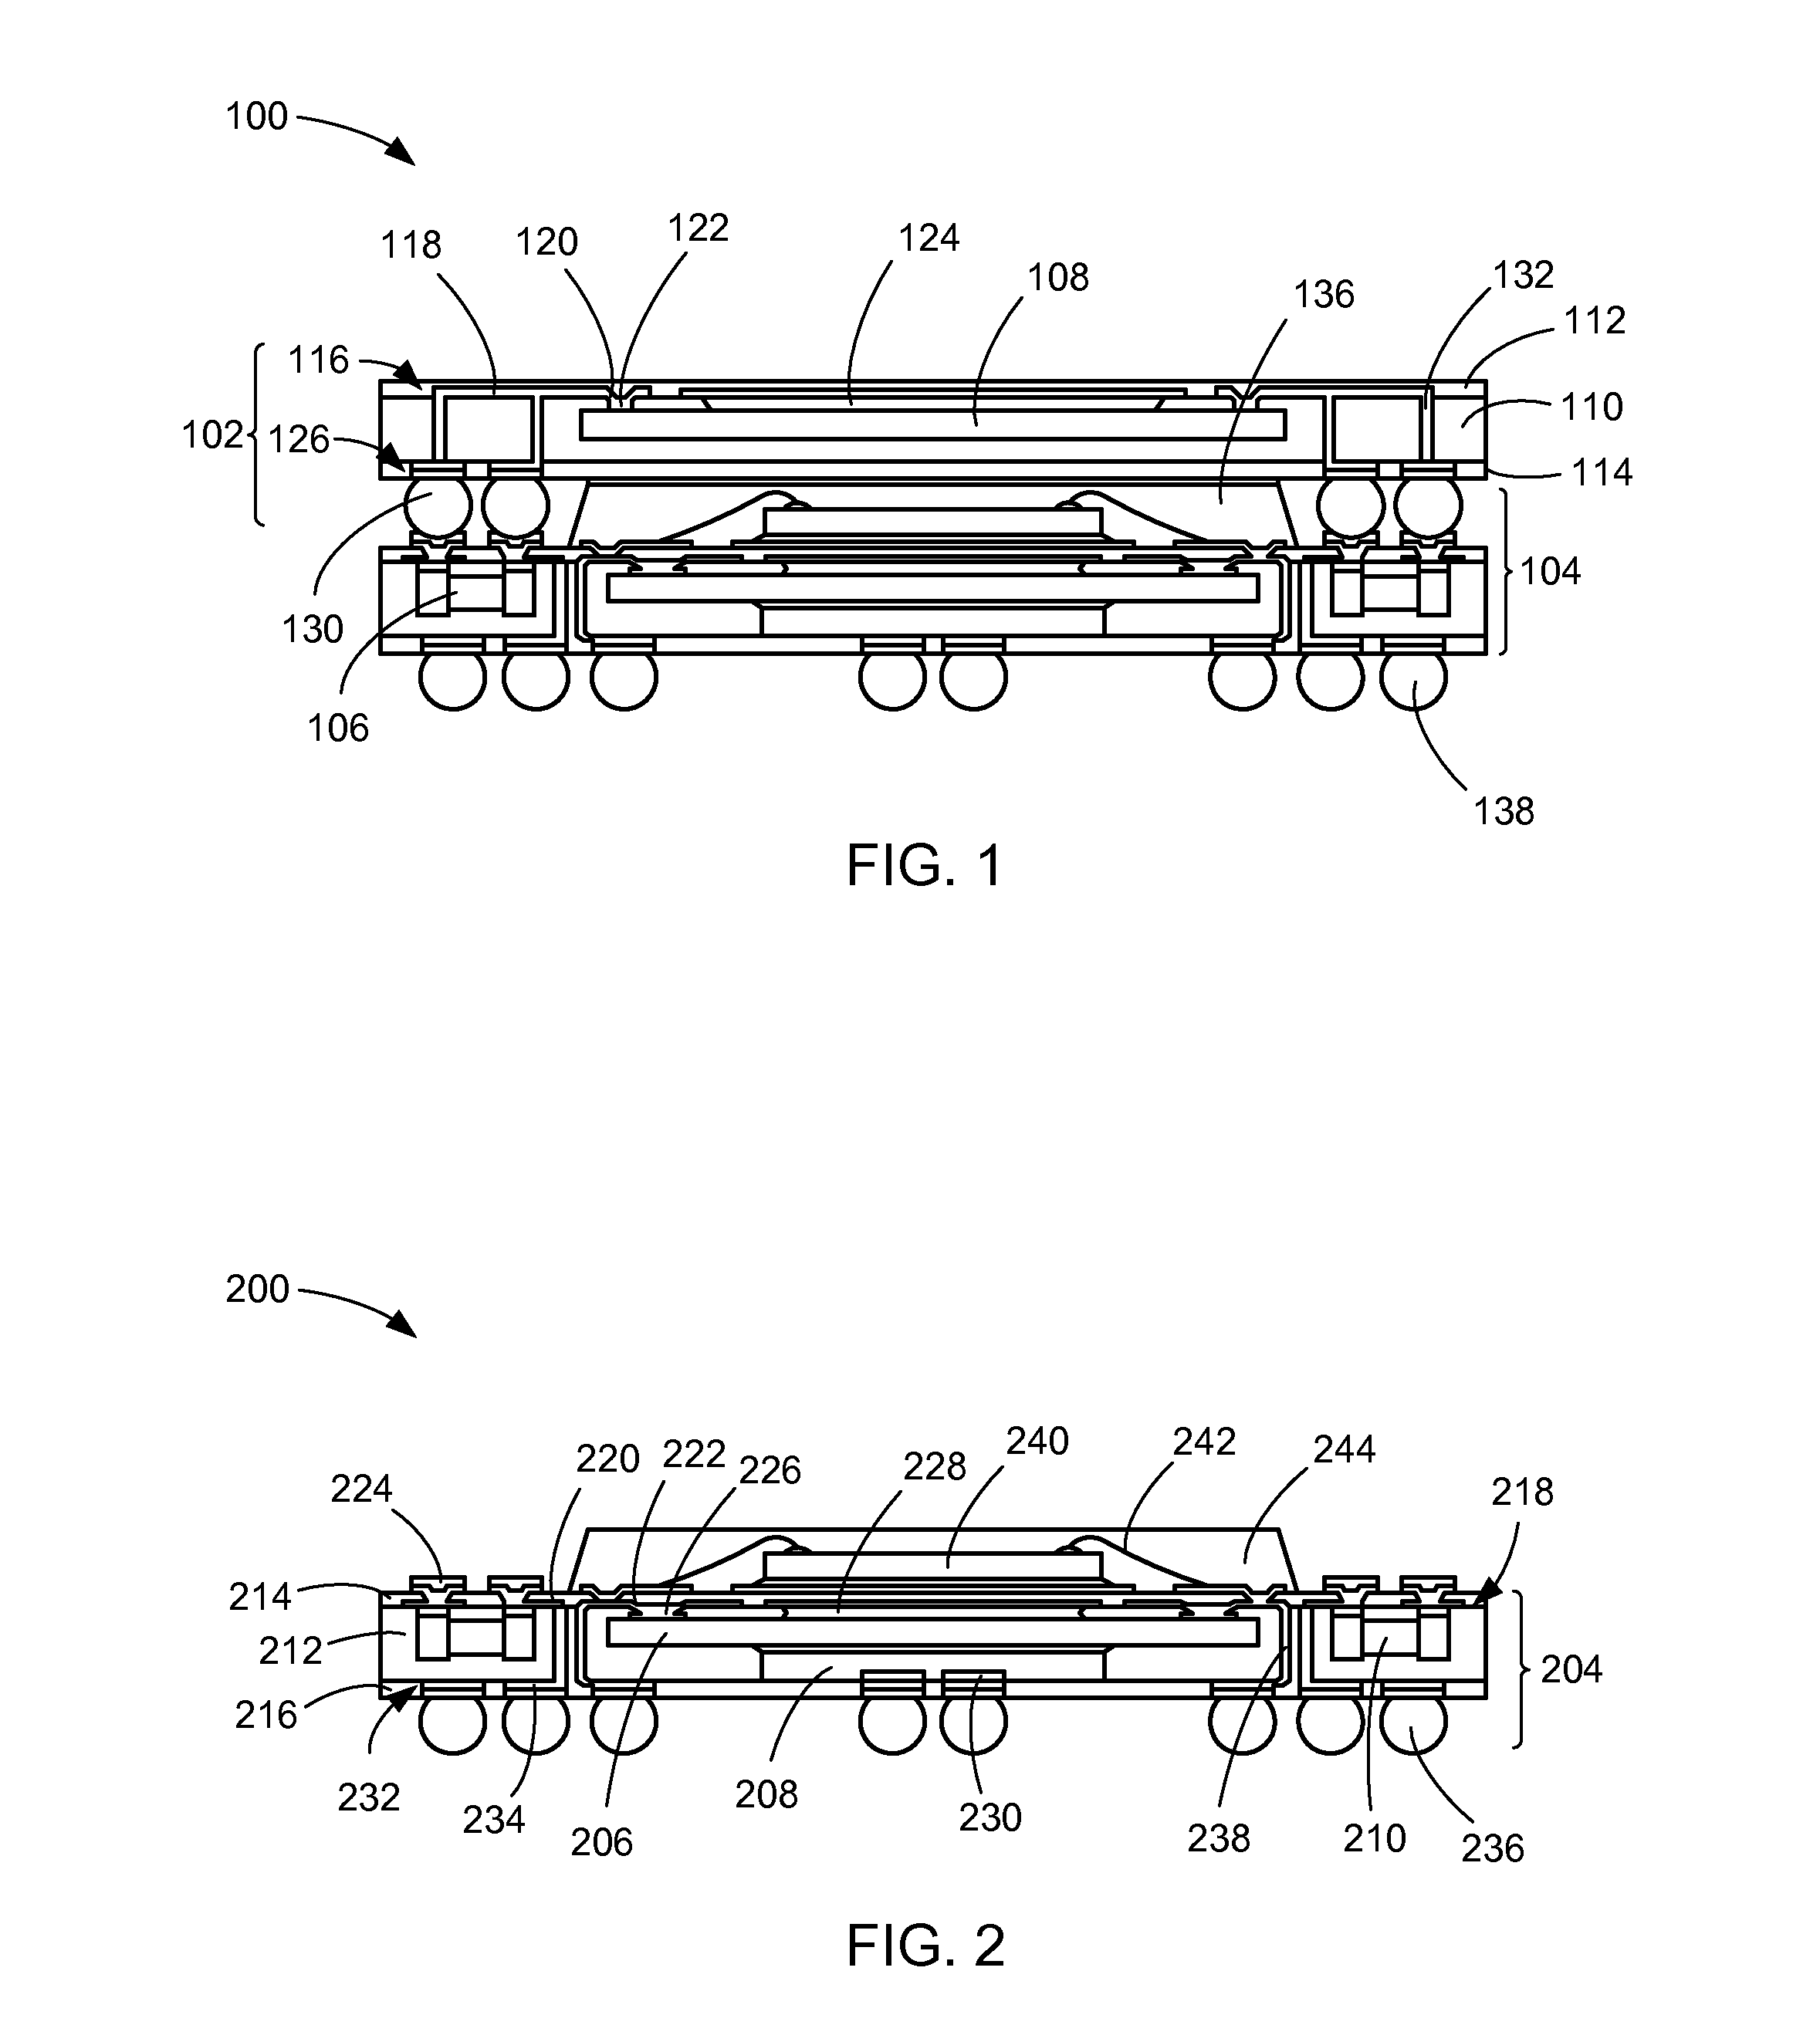 Embedded integrated circuit package-on-package system